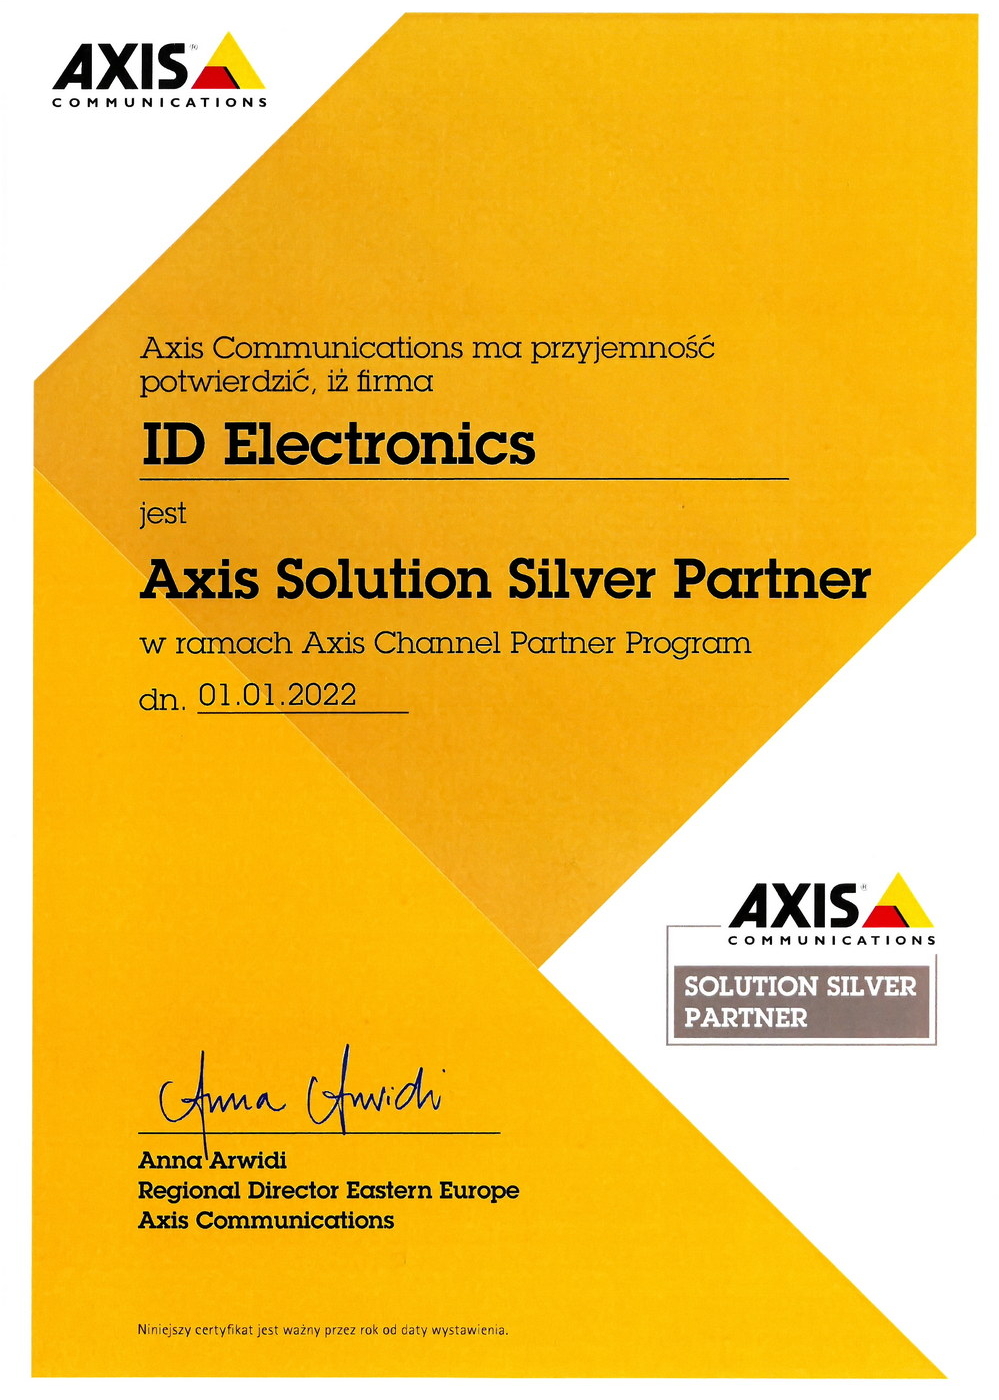 ID Electronics IDE Axis Solution Silver Partner